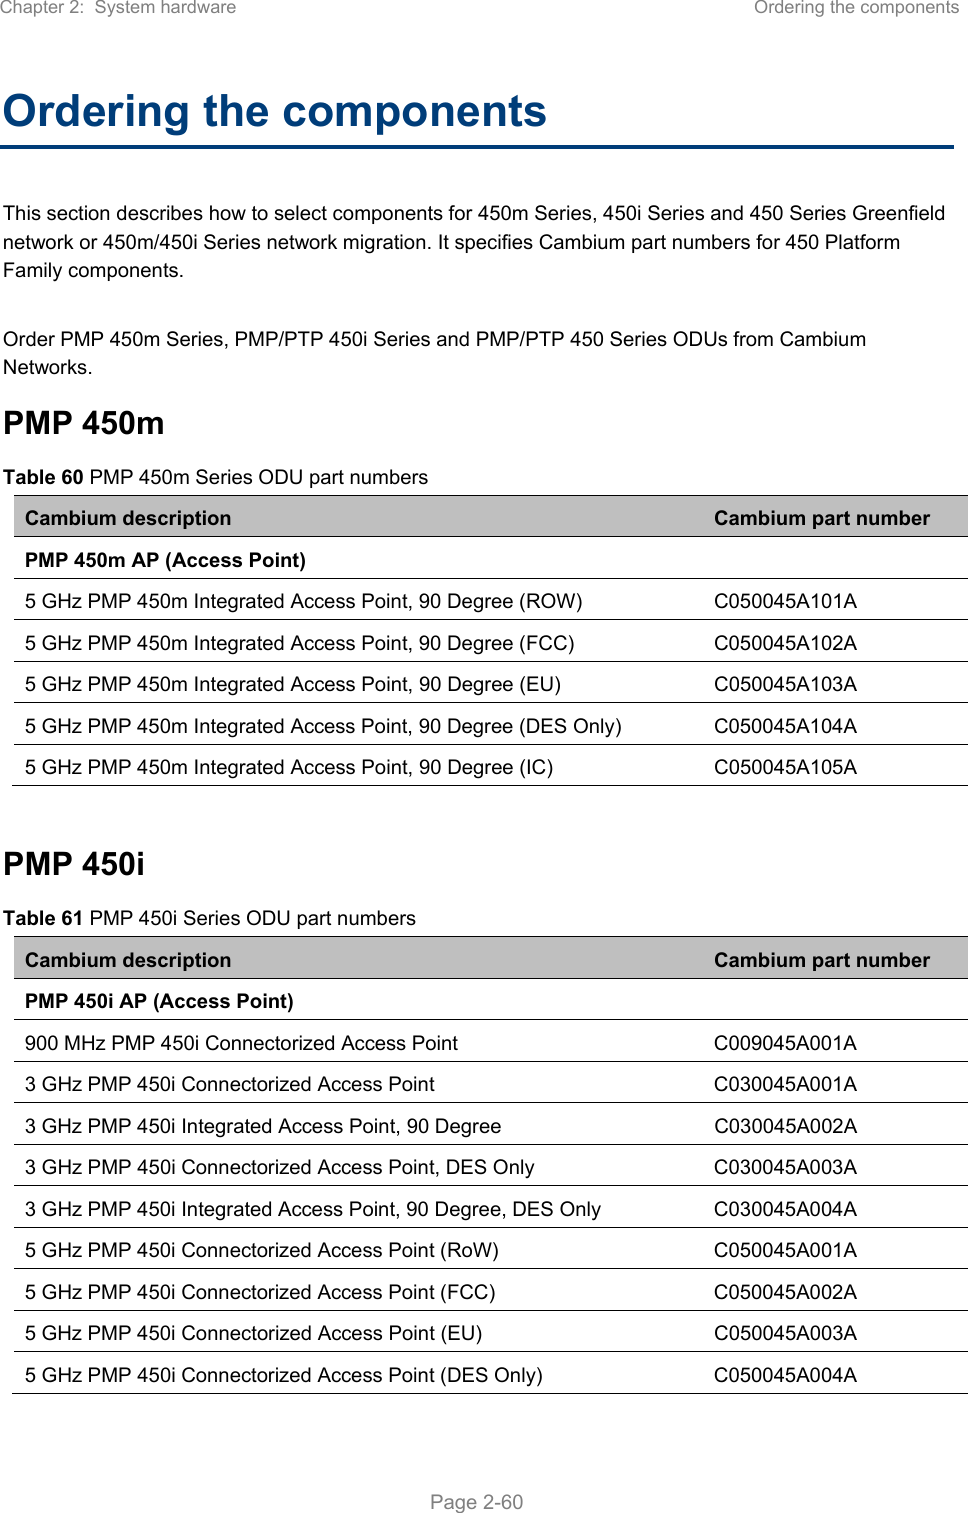 Chapter 2:  System hardware  Ordering the components   Page 2-60 Ordering the components This section describes how to select components for 450m Series, 450i Series and 450 Series Greenfield network or 450m/450i Series network migration. It specifies Cambium part numbers for 450 Platform Family components.  Order PMP 450m Series, PMP/PTP 450i Series and PMP/PTP 450 Series ODUs from Cambium Networks.  PMP 450m Table 60 PMP 450m Series ODU part numbers Cambium description  Cambium part number PMP 450m AP (Access Point)    5 GHz PMP 450m Integrated Access Point, 90 Degree (ROW)  C050045A101A 5 GHz PMP 450m Integrated Access Point, 90 Degree (FCC)  C050045A102A 5 GHz PMP 450m Integrated Access Point, 90 Degree (EU)  C050045A103A 5 GHz PMP 450m Integrated Access Point, 90 Degree (DES Only)  C050045A104A 5 GHz PMP 450m Integrated Access Point, 90 Degree (IC)  C050045A105A  PMP 450i Table 61 PMP 450i Series ODU part numbers Cambium description  Cambium part number PMP 450i AP (Access Point)    900 MHz PMP 450i Connectorized Access Point  C009045A001A 3 GHz PMP 450i Connectorized Access Point  C030045A001A 3 GHz PMP 450i Integrated Access Point, 90 Degree  C030045A002A 3 GHz PMP 450i Connectorized Access Point, DES Only  C030045A003A 3 GHz PMP 450i Integrated Access Point, 90 Degree, DES Only  C030045A004A 5 GHz PMP 450i Connectorized Access Point (RoW)  C050045A001A 5 GHz PMP 450i Connectorized Access Point (FCC)  C050045A002A 5 GHz PMP 450i Connectorized Access Point (EU)  C050045A003A 5 GHz PMP 450i Connectorized Access Point (DES Only)  C050045A004A 